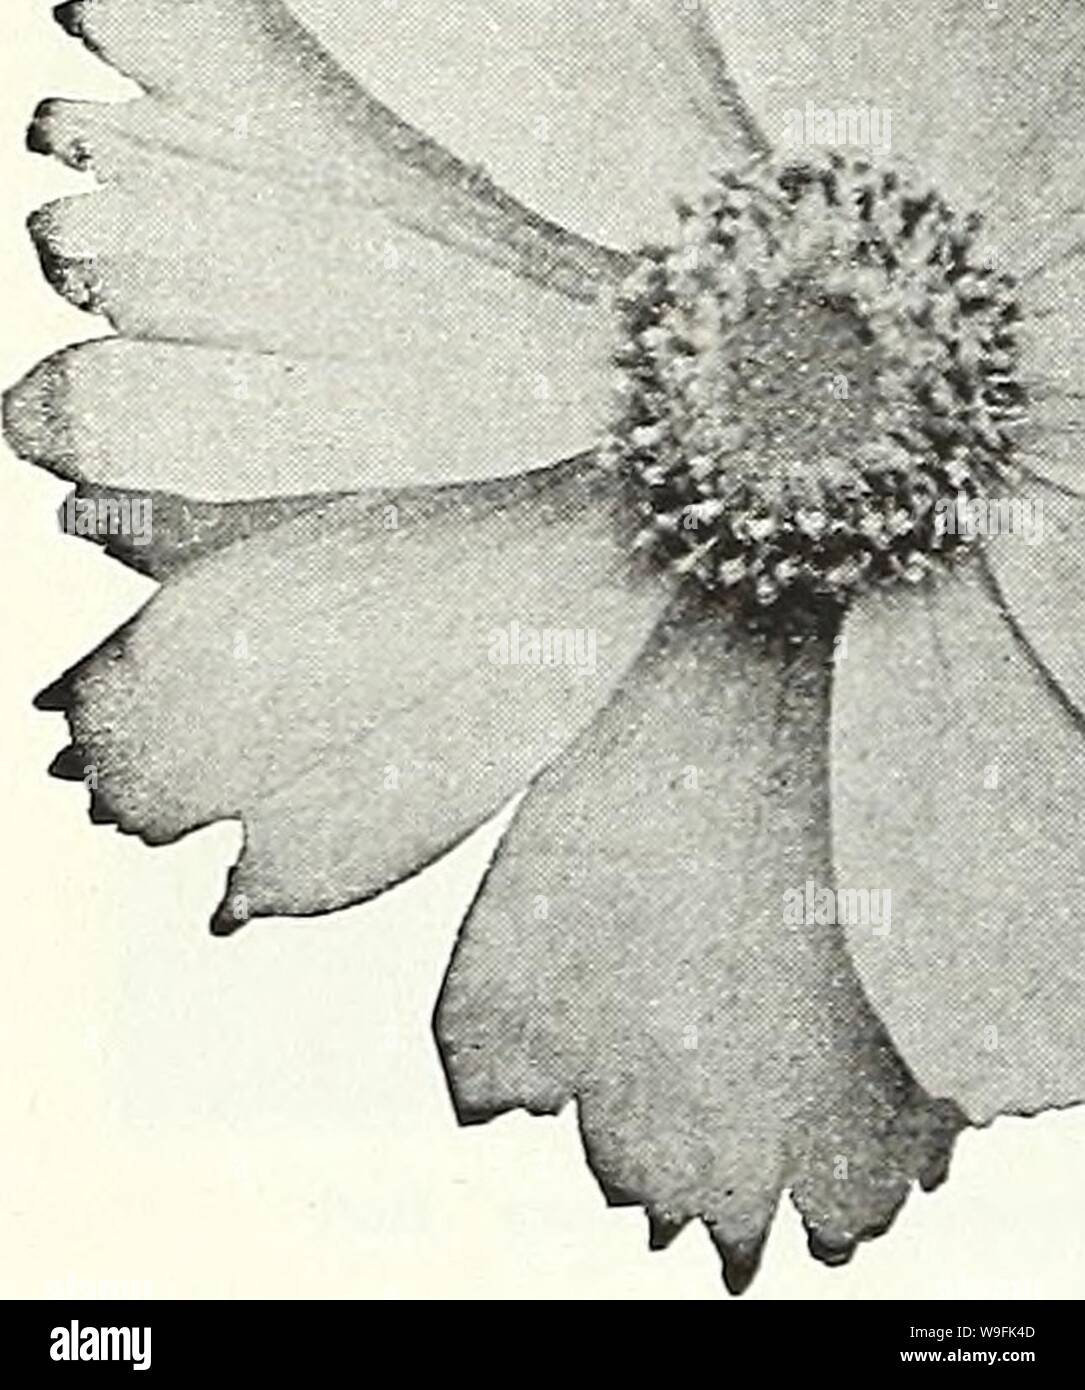 Archive image from page 49 of Currie's garden annual  62nd. Currie's garden annual : 62nd year spring 1937  curriesgardenann19curr 3 Year: 1937 ( Page 46 CURRIE BROTHERS CO LWAUKEE, WIS r r' r v-    Coreopsis—'Mayfield Giant' HARDY PERENNIAL CANDYTUFT GIBRALTRICA — White, shading to lilac. Seeds    „    Pkt. JOc SEMPERVIRENS — White. Plants, price, each. 25c. Seeds - — Pkt. 10c CATANANCHE Charming, hardy perennial, attaining about 3 feet in height. Excellent for cutting or as a border plant. BICOLOR—Blue and white flowers. Seeds Pkt. 15c COERULEA—Blue flowers. Seeds Pkt. 15e CRUCIANELLA (Cross Stock Photo